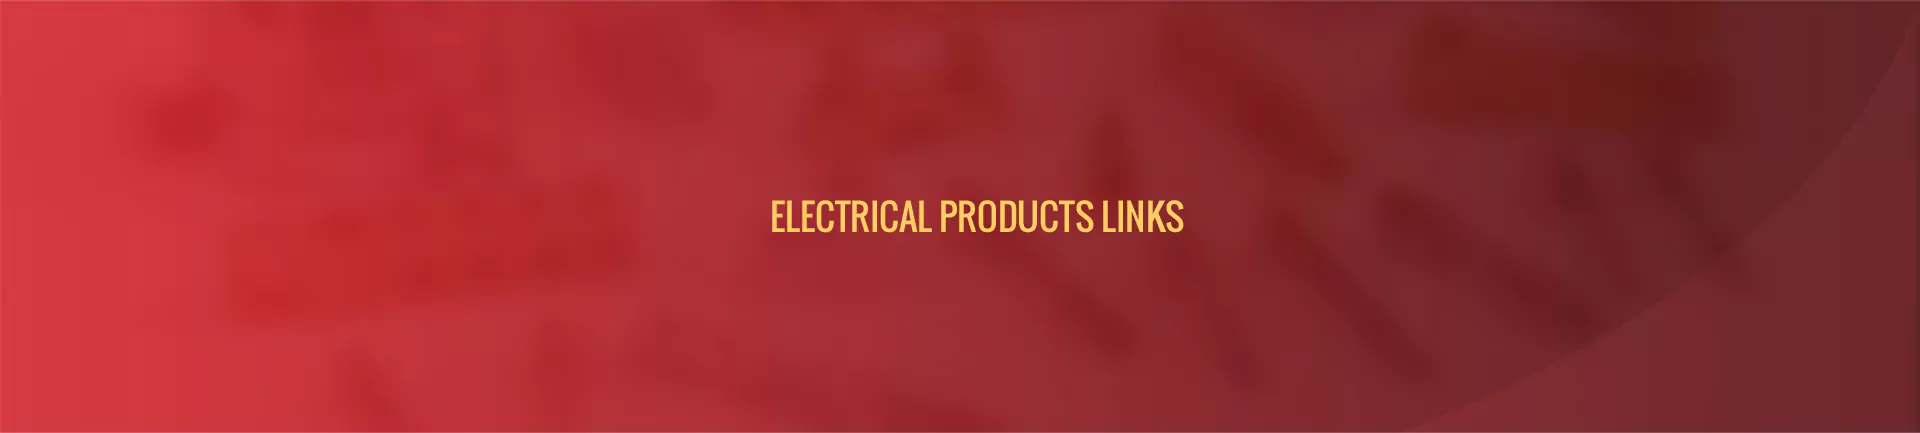 electrical-links-banner